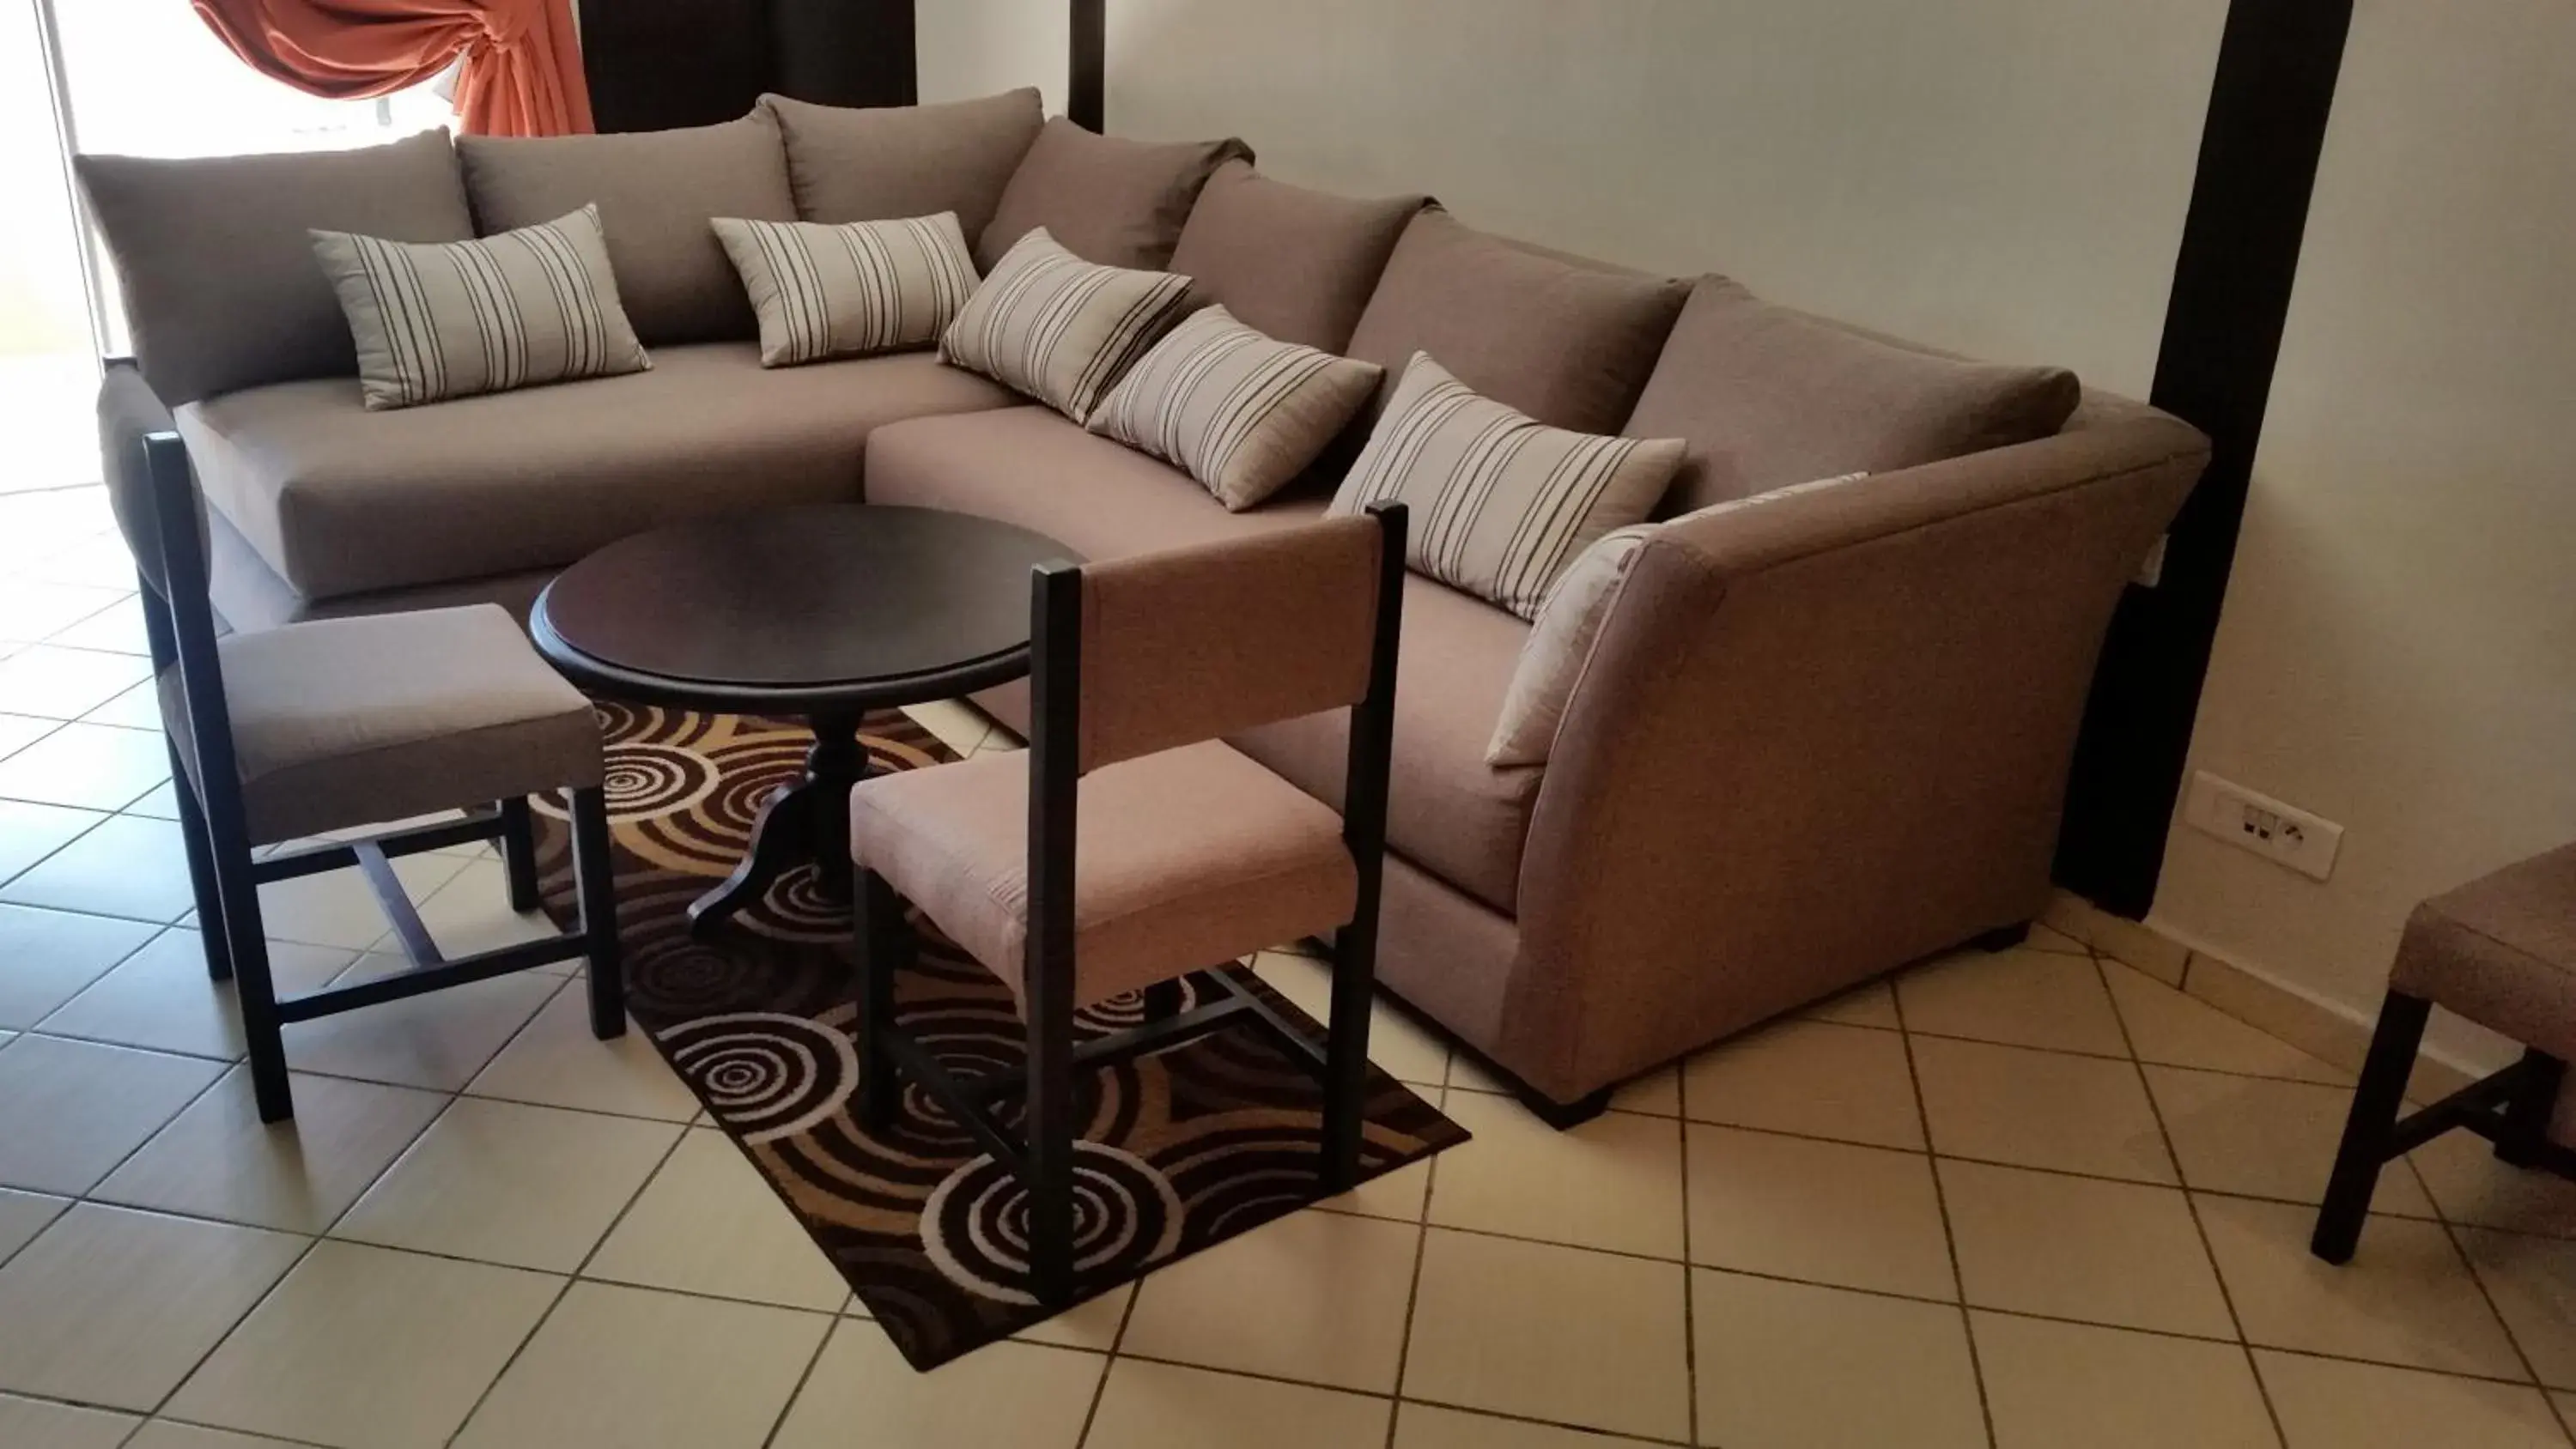 Seating Area in New Farah Hotel